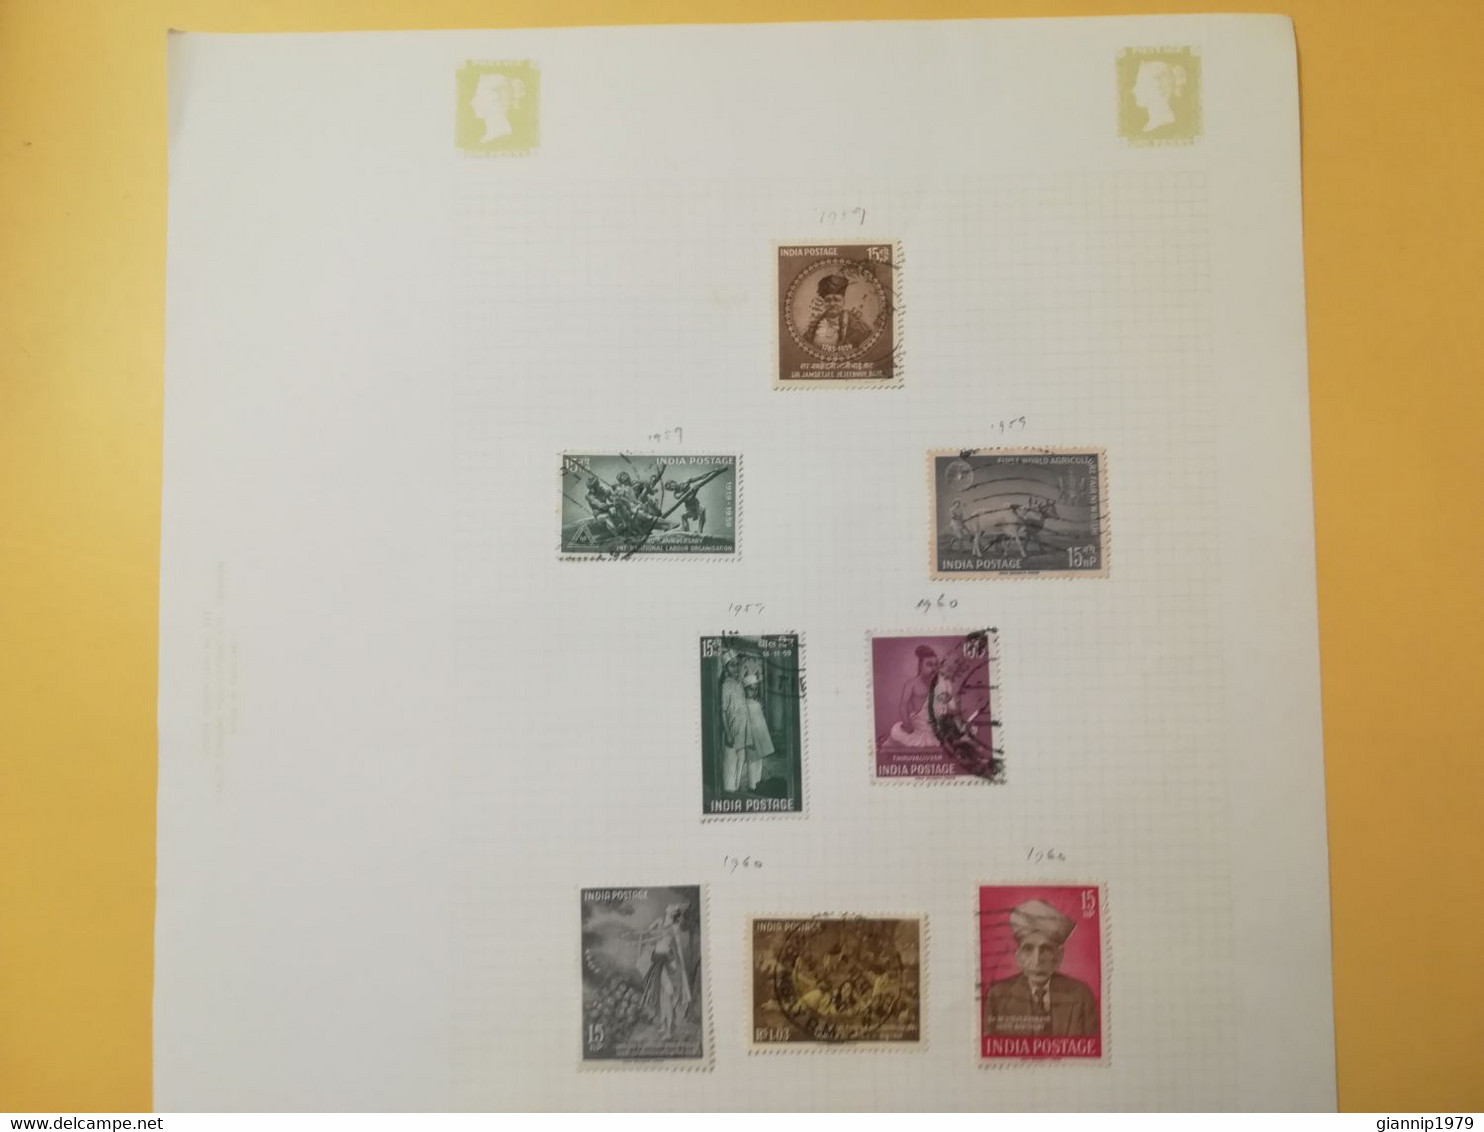 PAGINA PAGE ALBUM INDIA 1959 ATTACCATI PAGE WITH STAMPS COLLEZIONI LOTTO LOT LOTS - Collections, Lots & Series